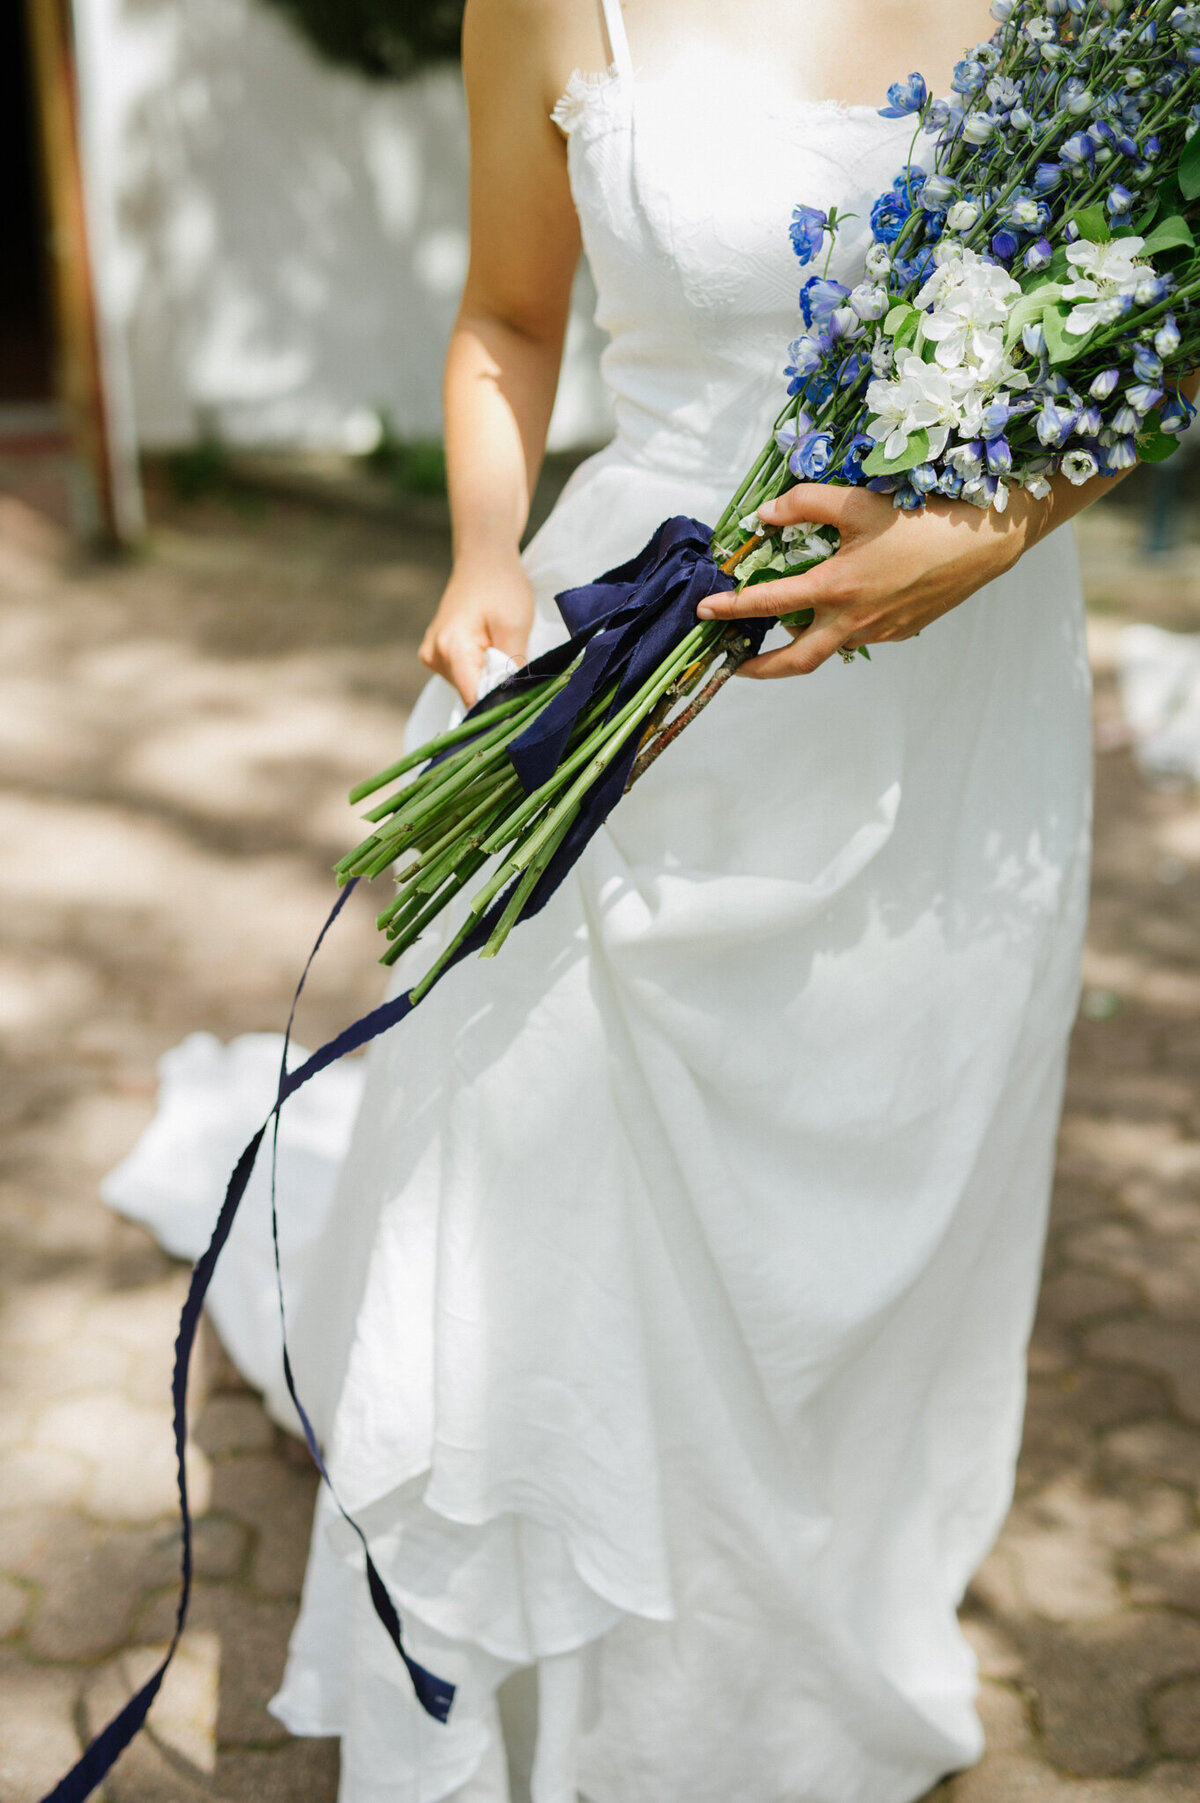 Classic, editorial bridal inspiration, long simple wedding gown, blue and white bouquet, captured by Christy D. Swanberg Photography, editorial elopement and wedding photographer in Calgary, Alberta, featured on the Bronte Bride Vendor Guide.